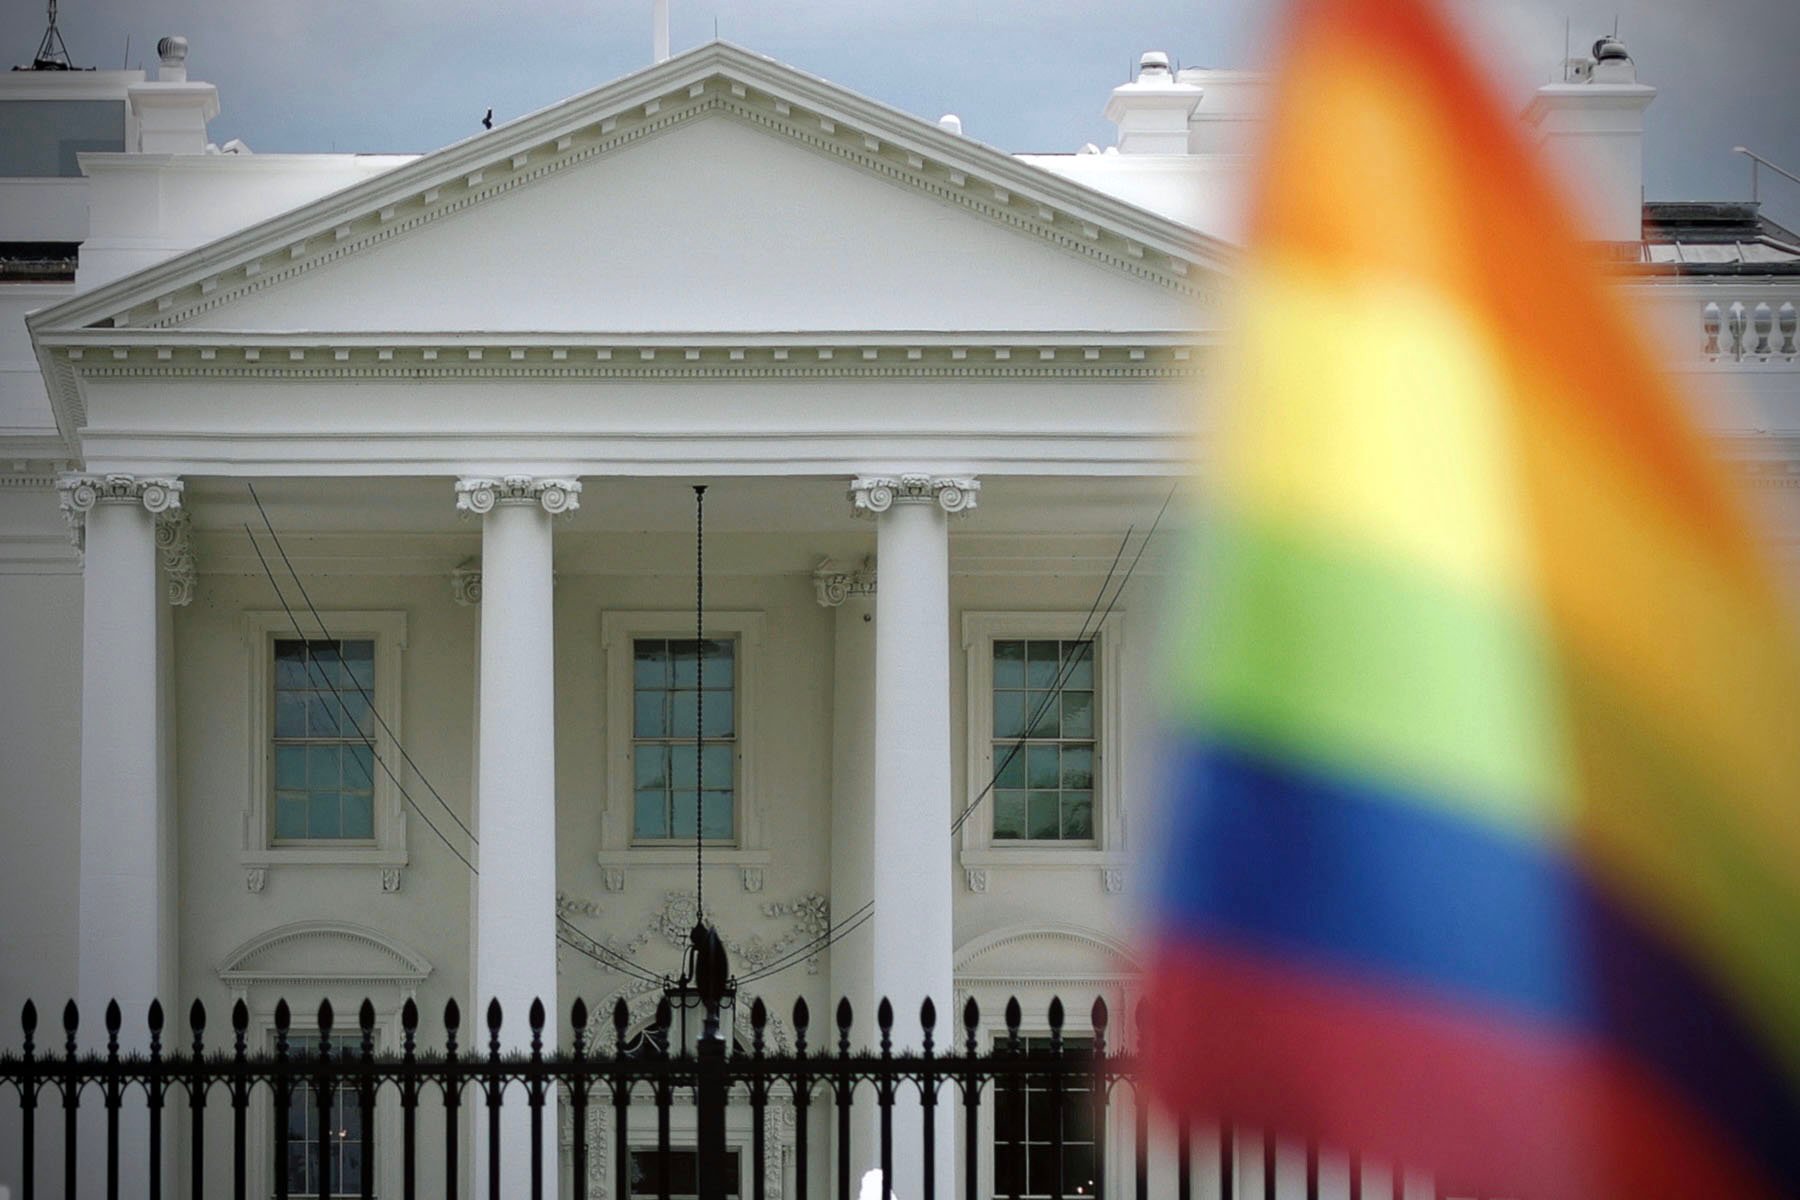 A pride flag is seen in front of the White House.